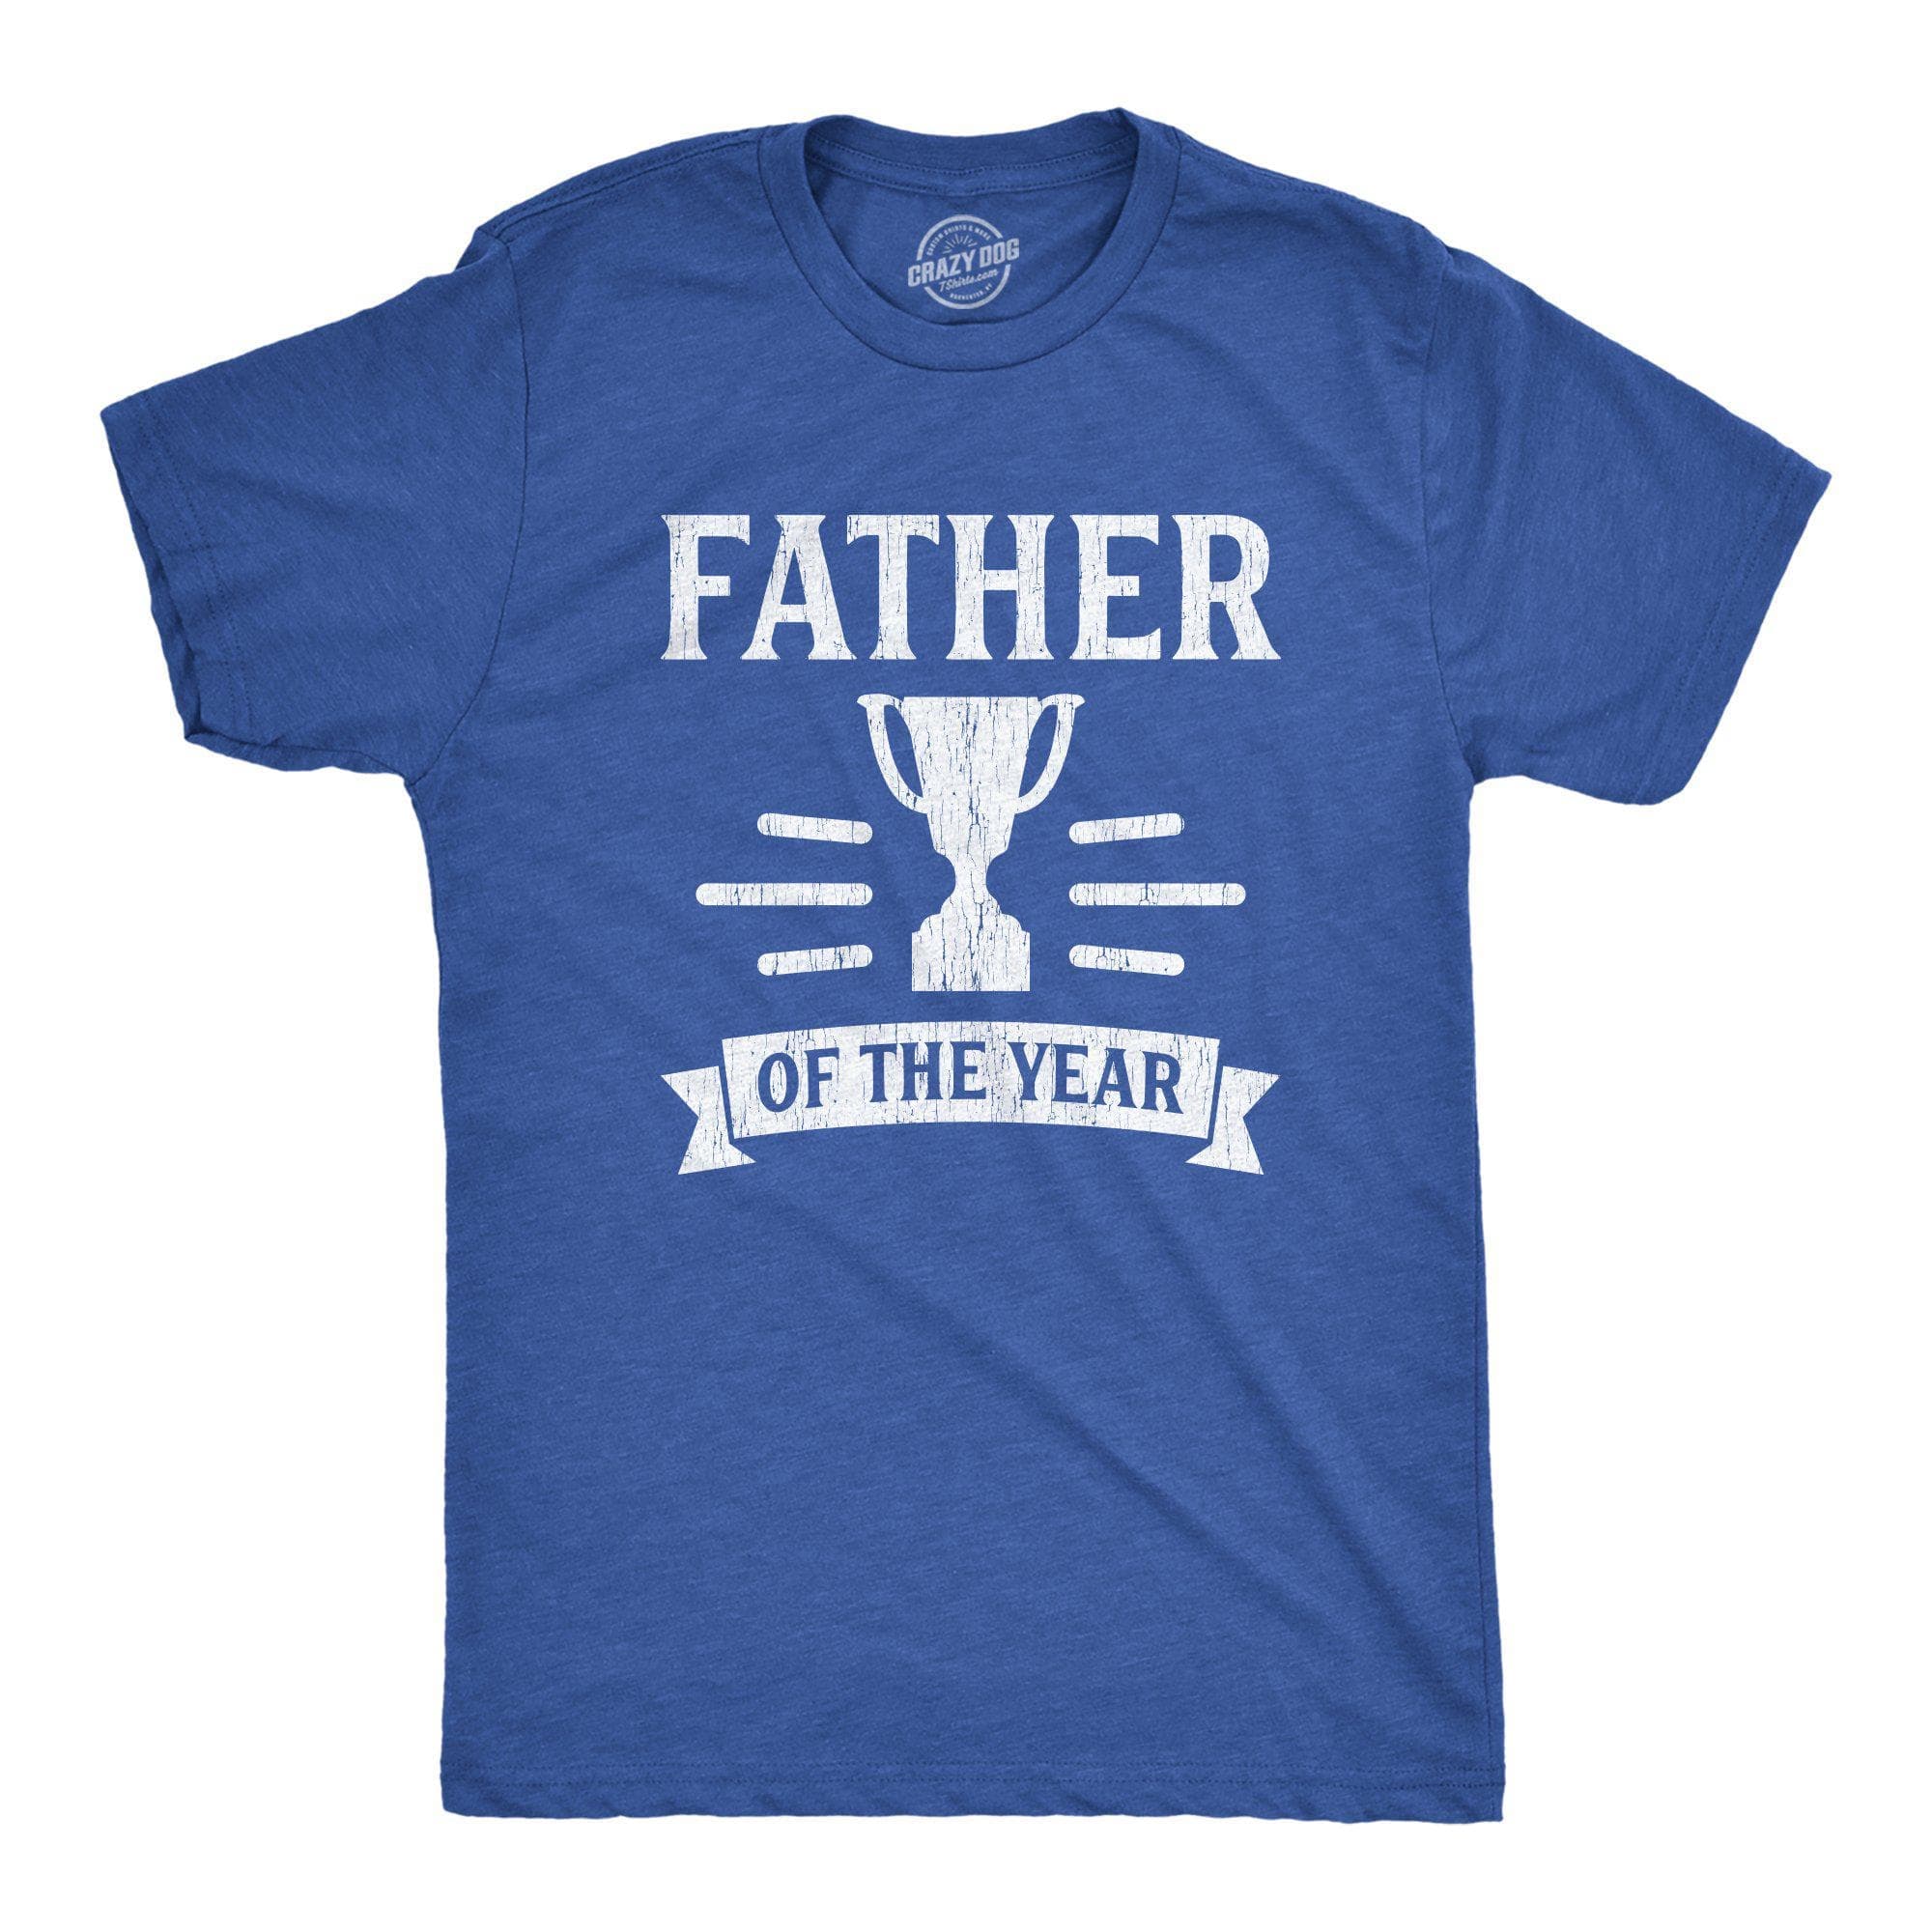 Father Of The Year Men's Tshirt - Crazy Dog T-Shirts